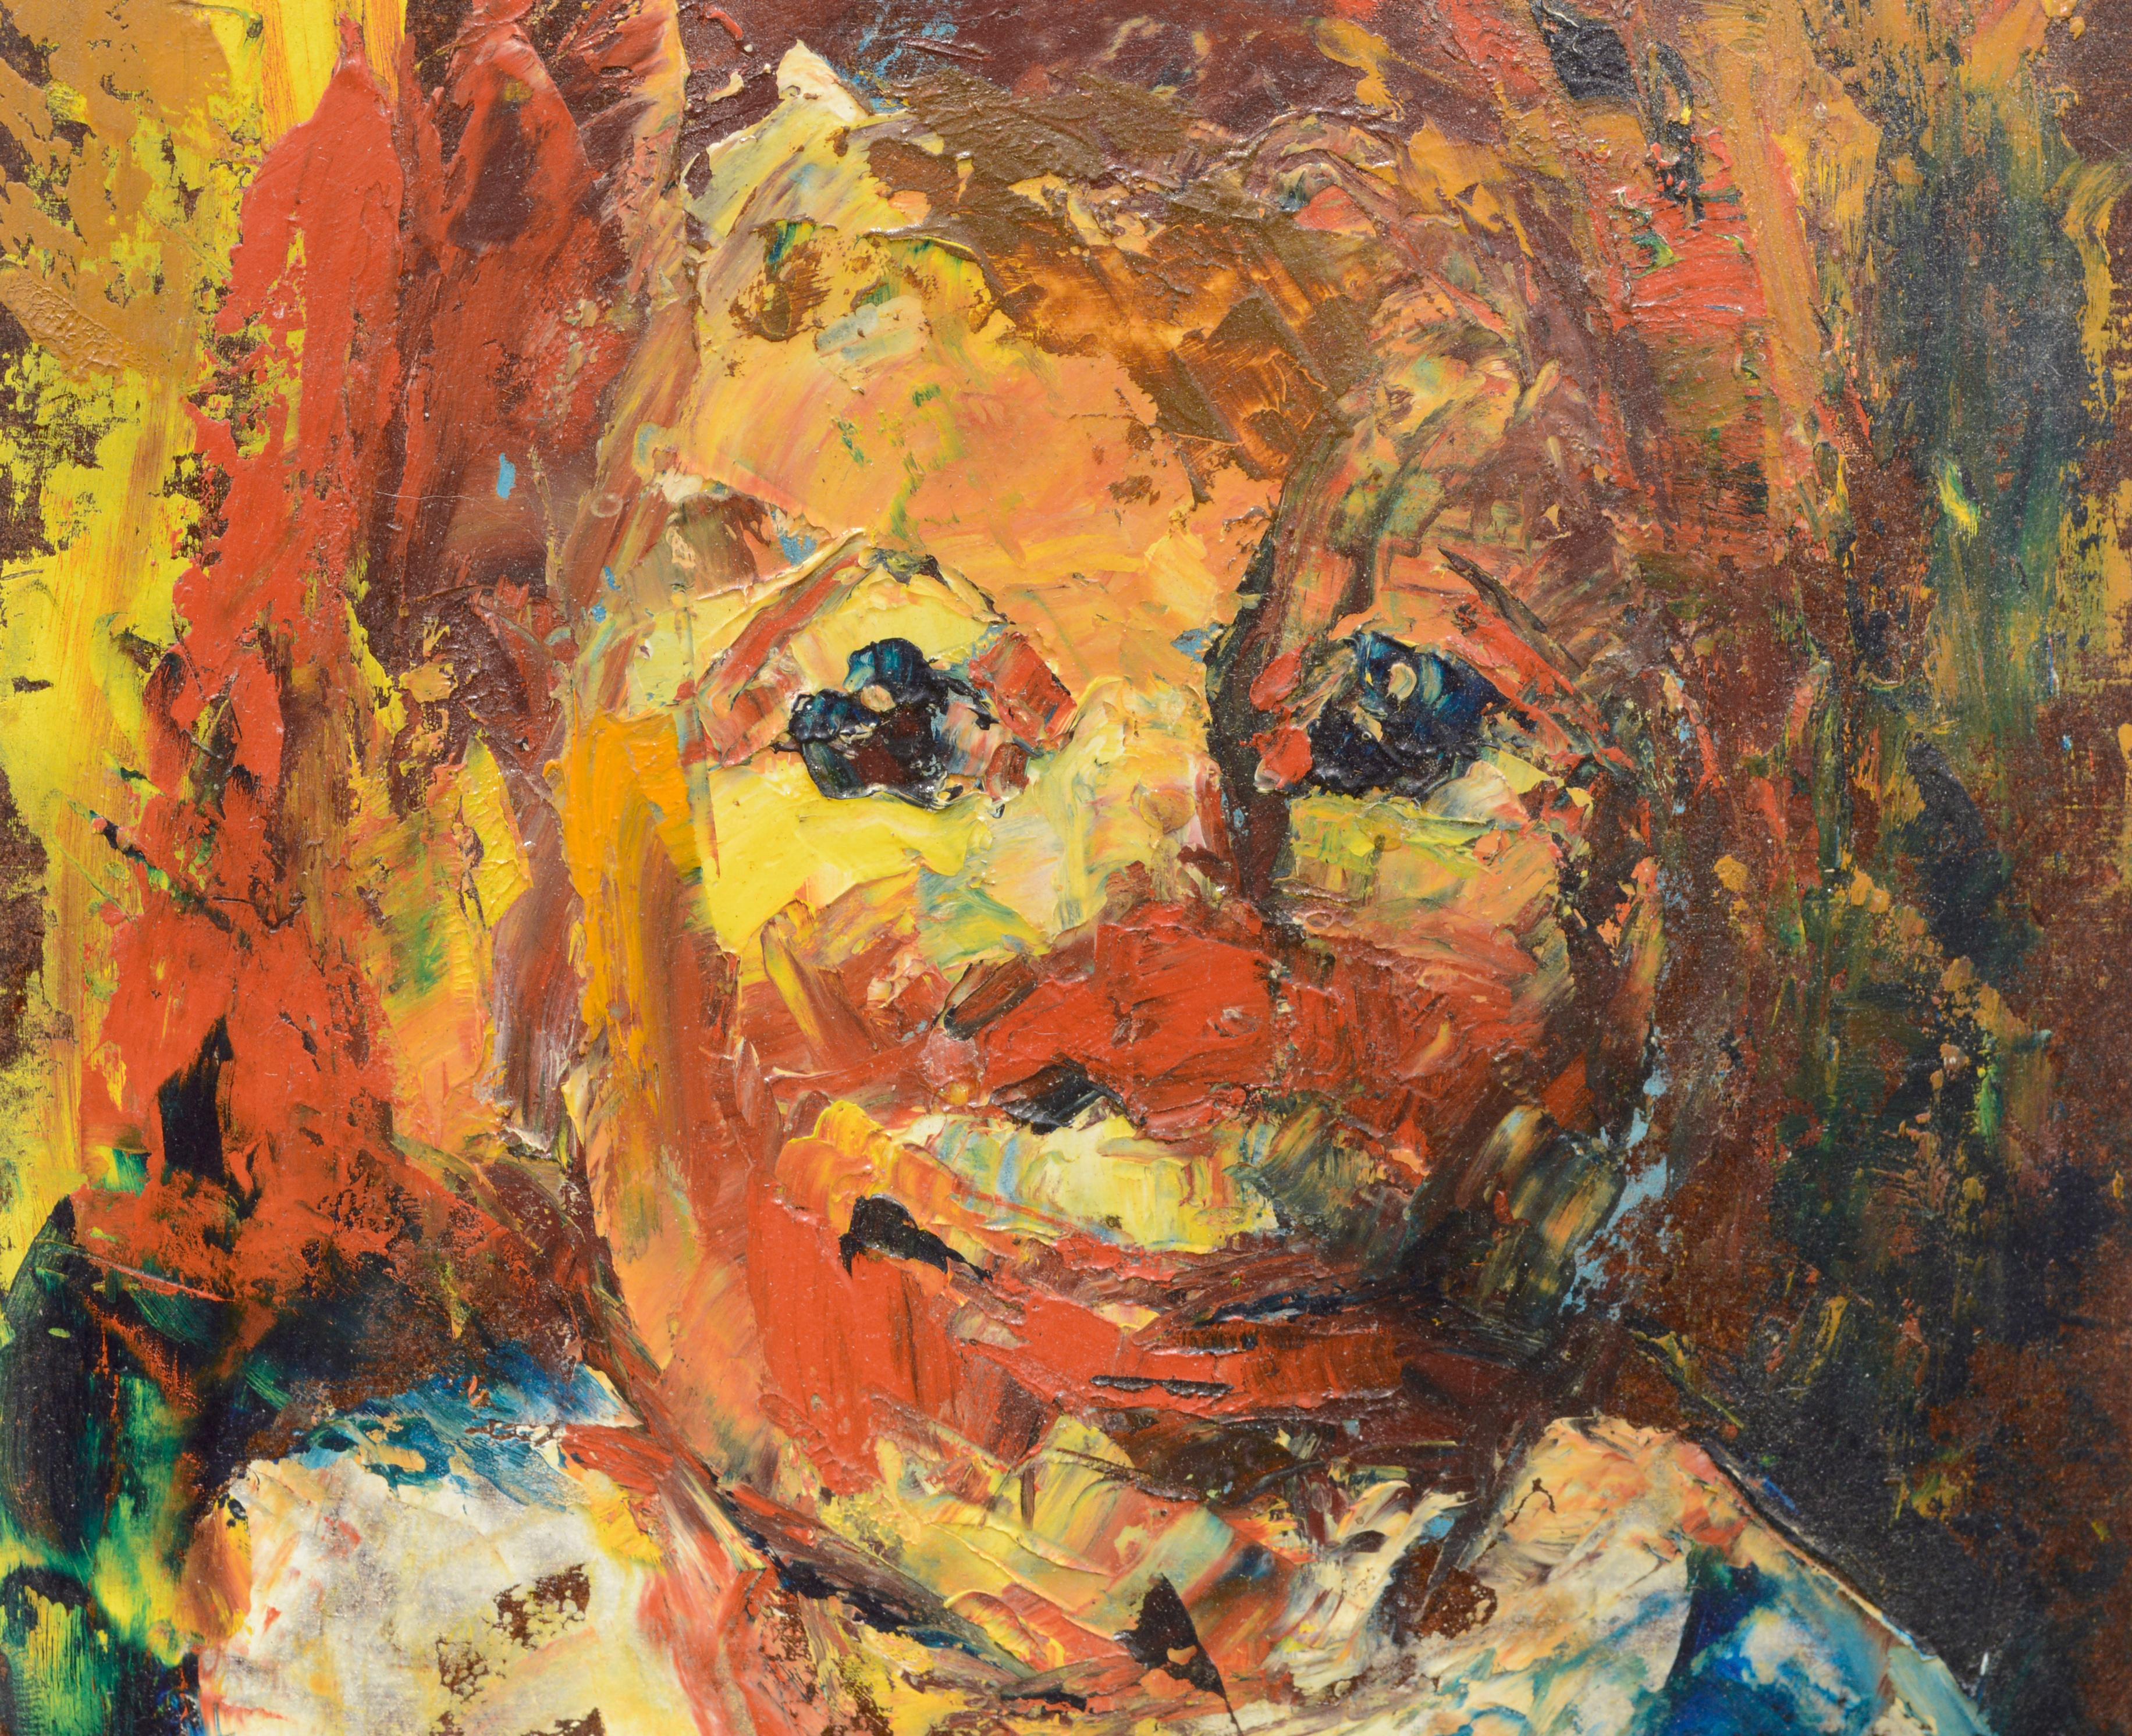 Small Expressionist Clown Portrait #2, 1960s - Painting by Marjorie May Blake